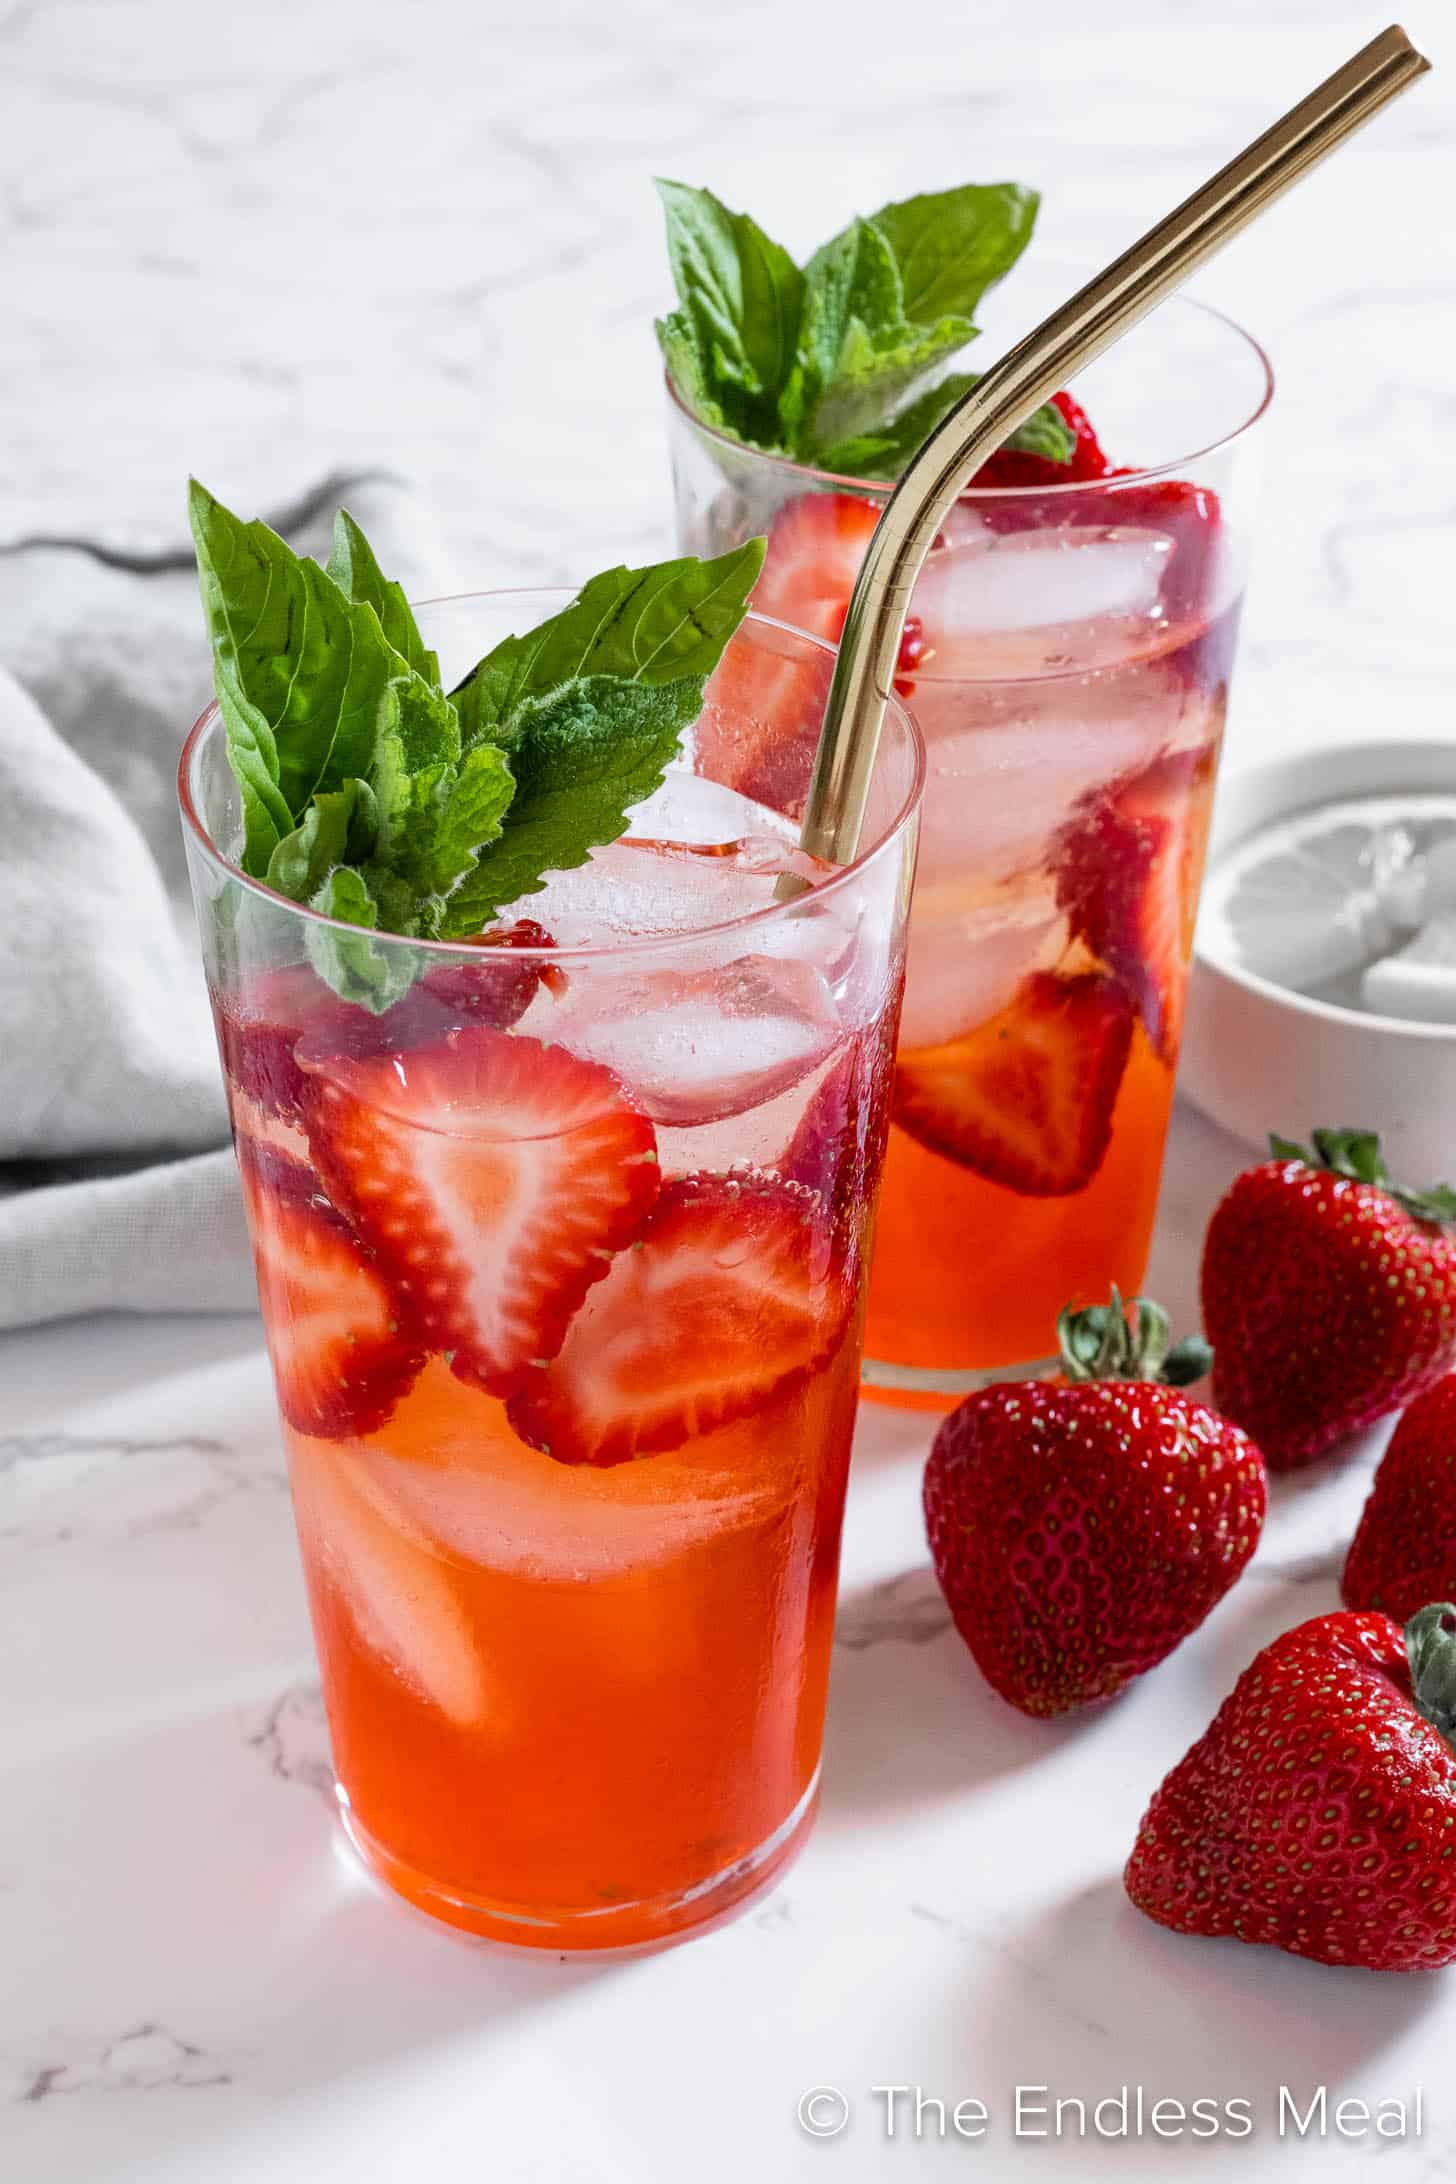 A Strawberry Mojito cocktail in a glass with a straw